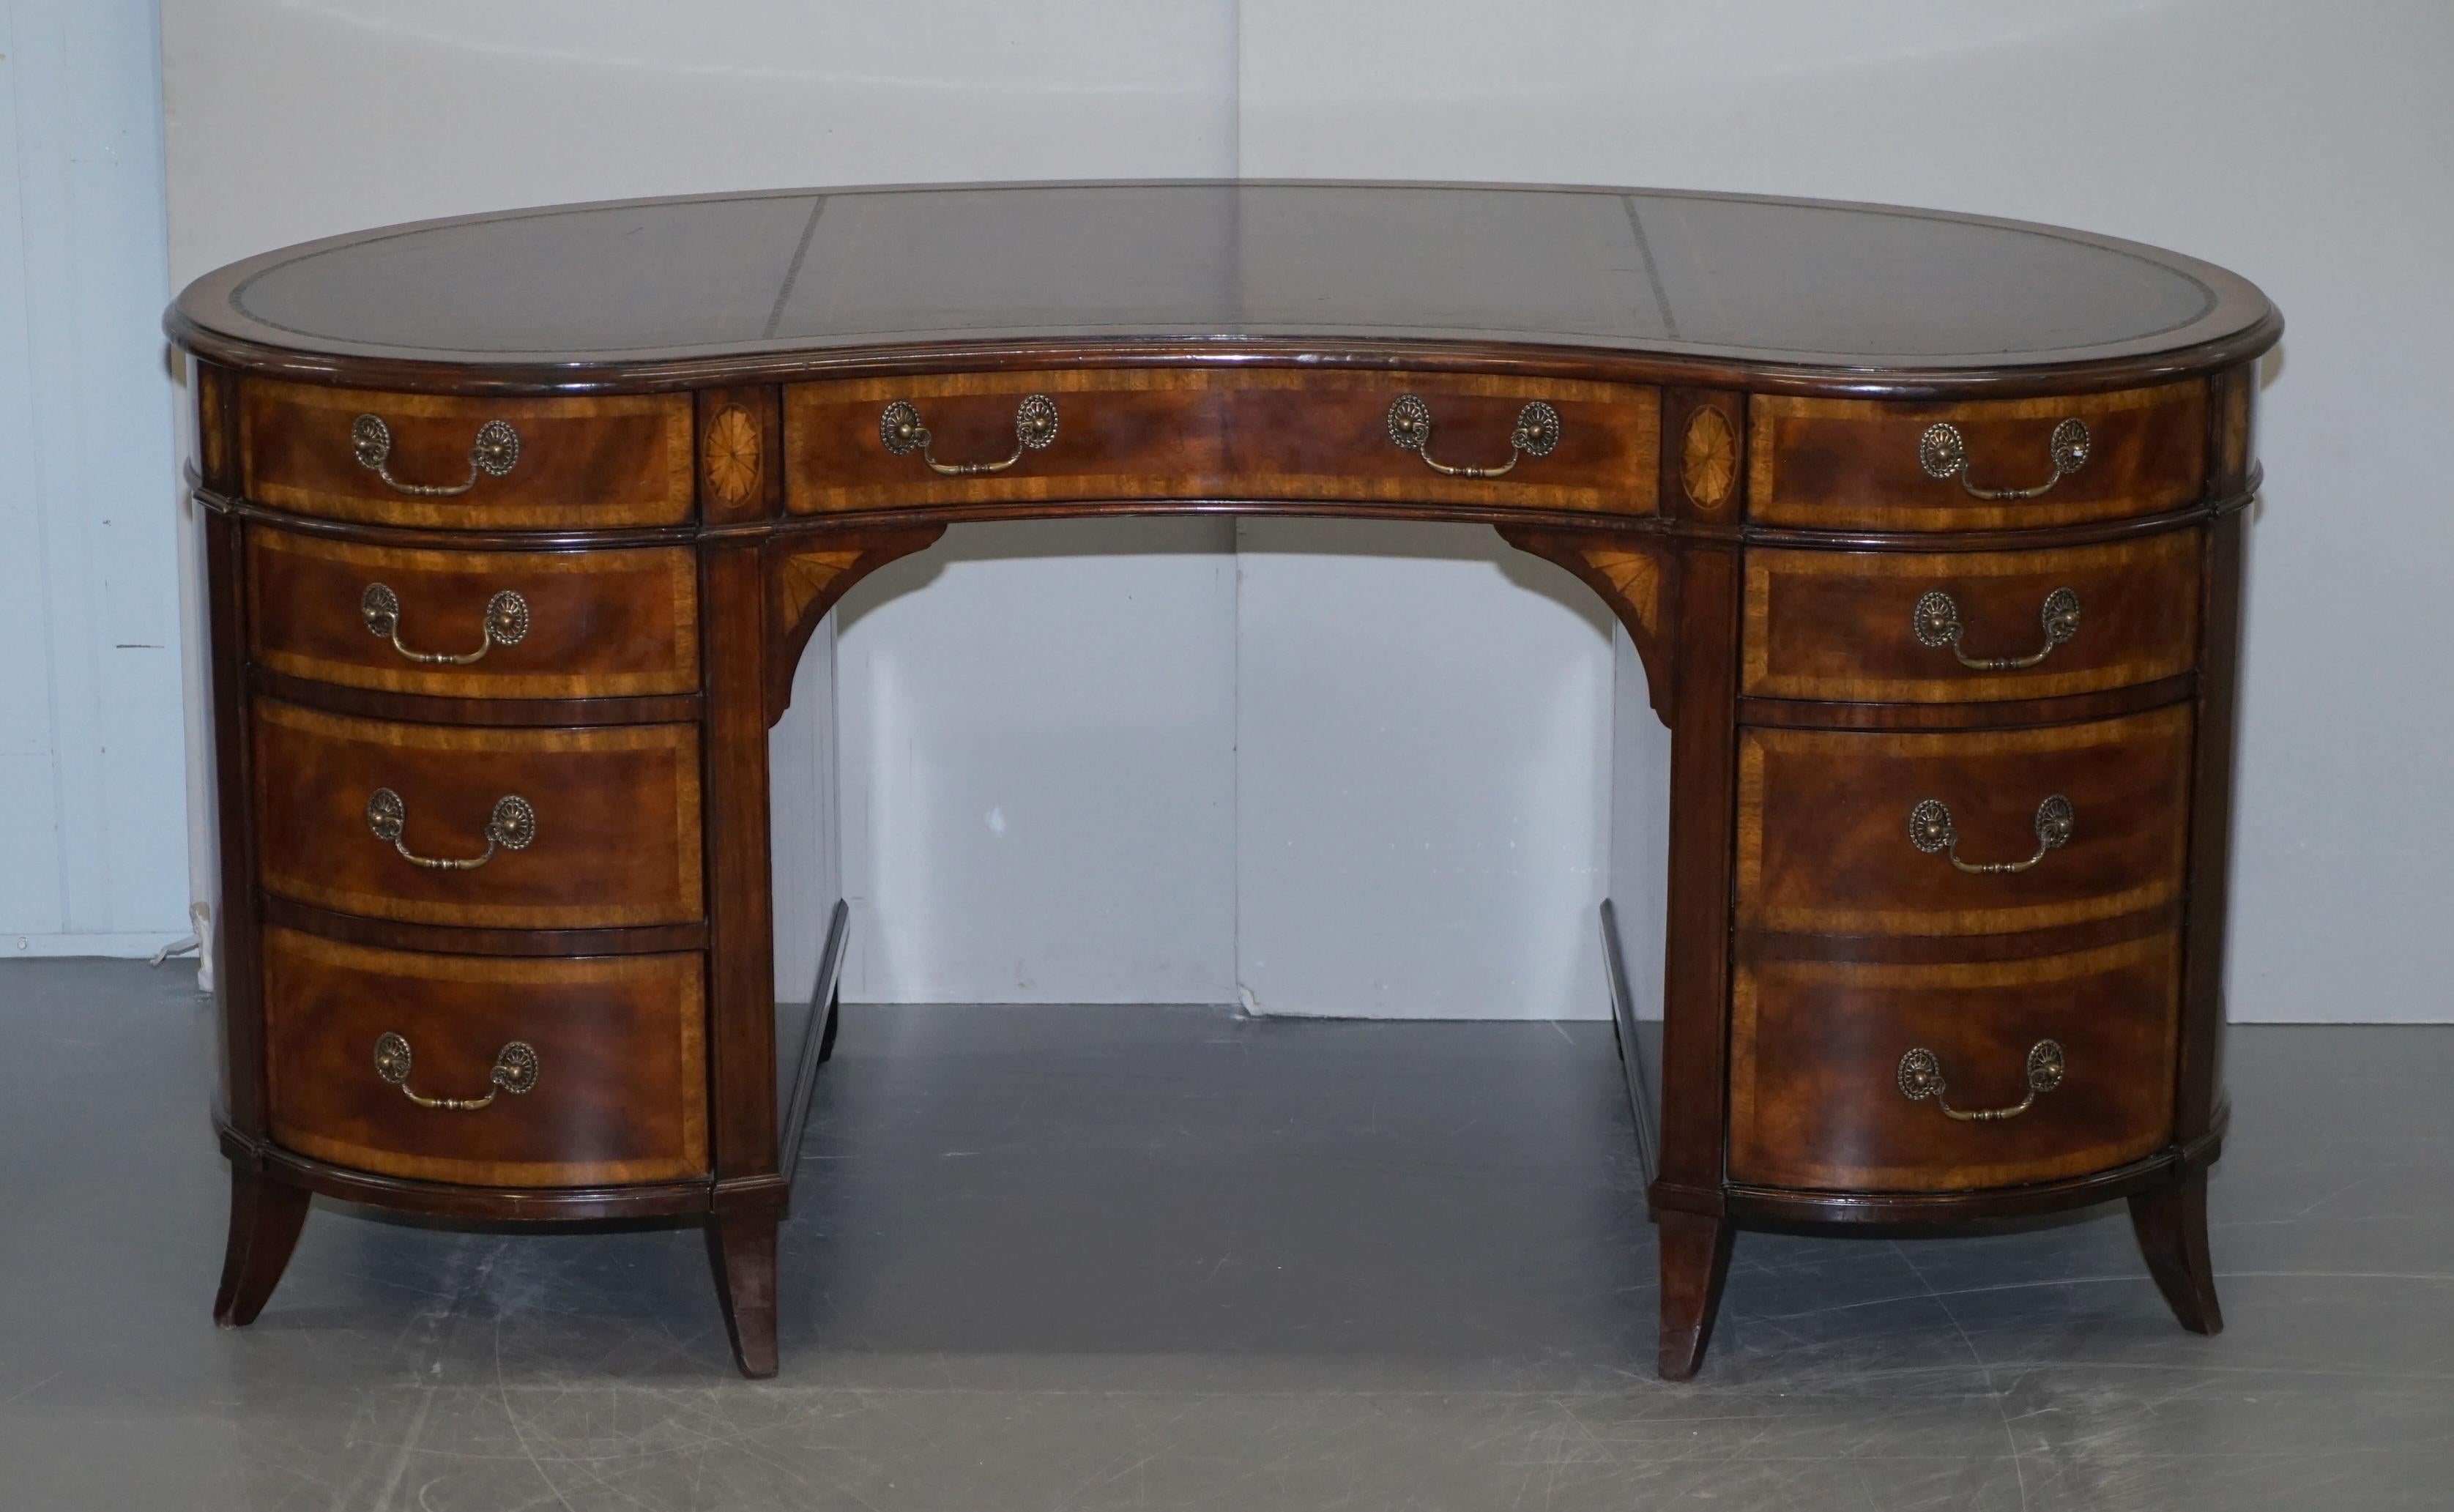 We are delighted to offer for sale this lovely handmade Crotch mahogany and walnut kidney desk with brown leather top

An exquisite looking and very well made piece. This desk is large and very heavy, the drawer linings are all solid oak and the